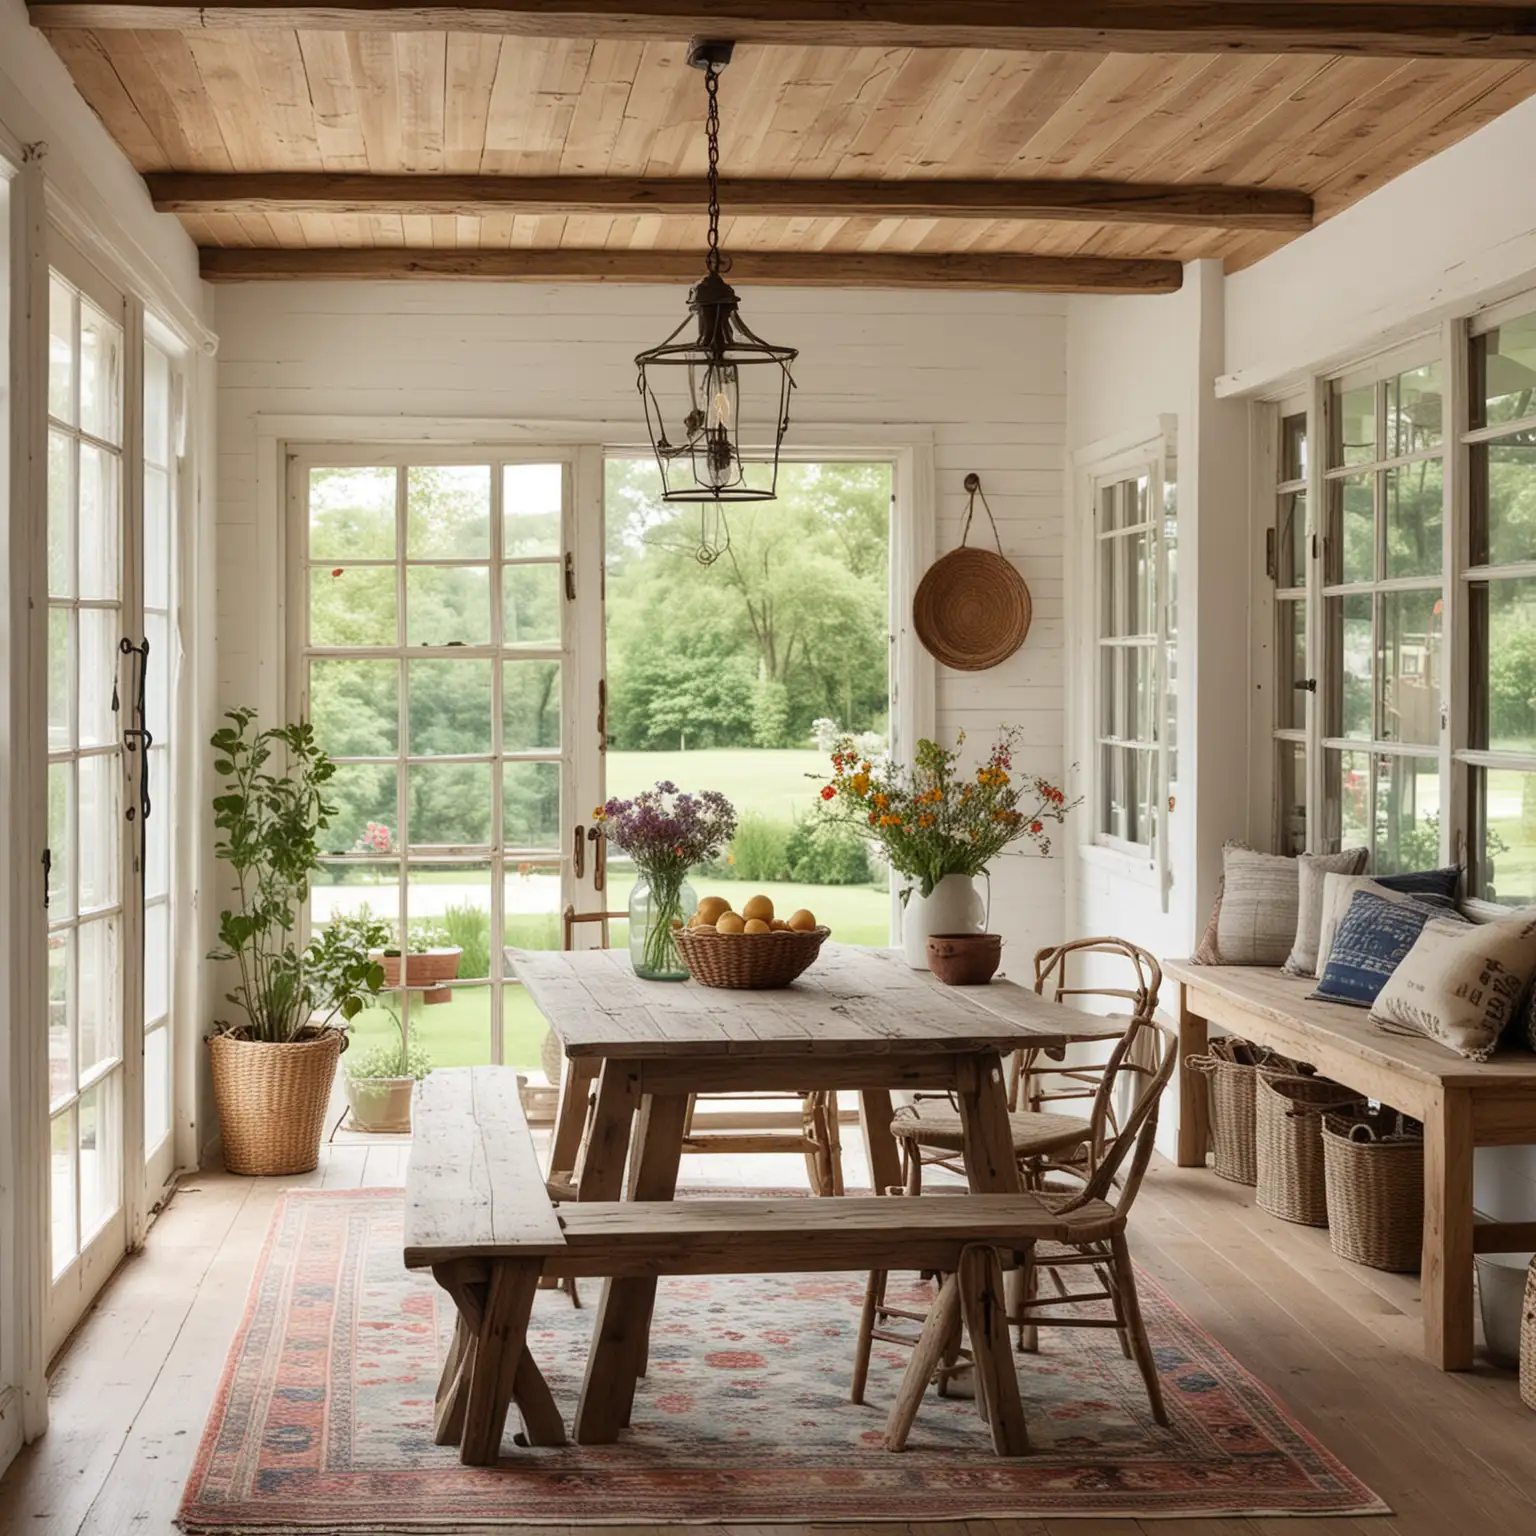 Rustic-Farmhouse-Dining-Room-with-Vintage-Table-and-Wildflower-Decor